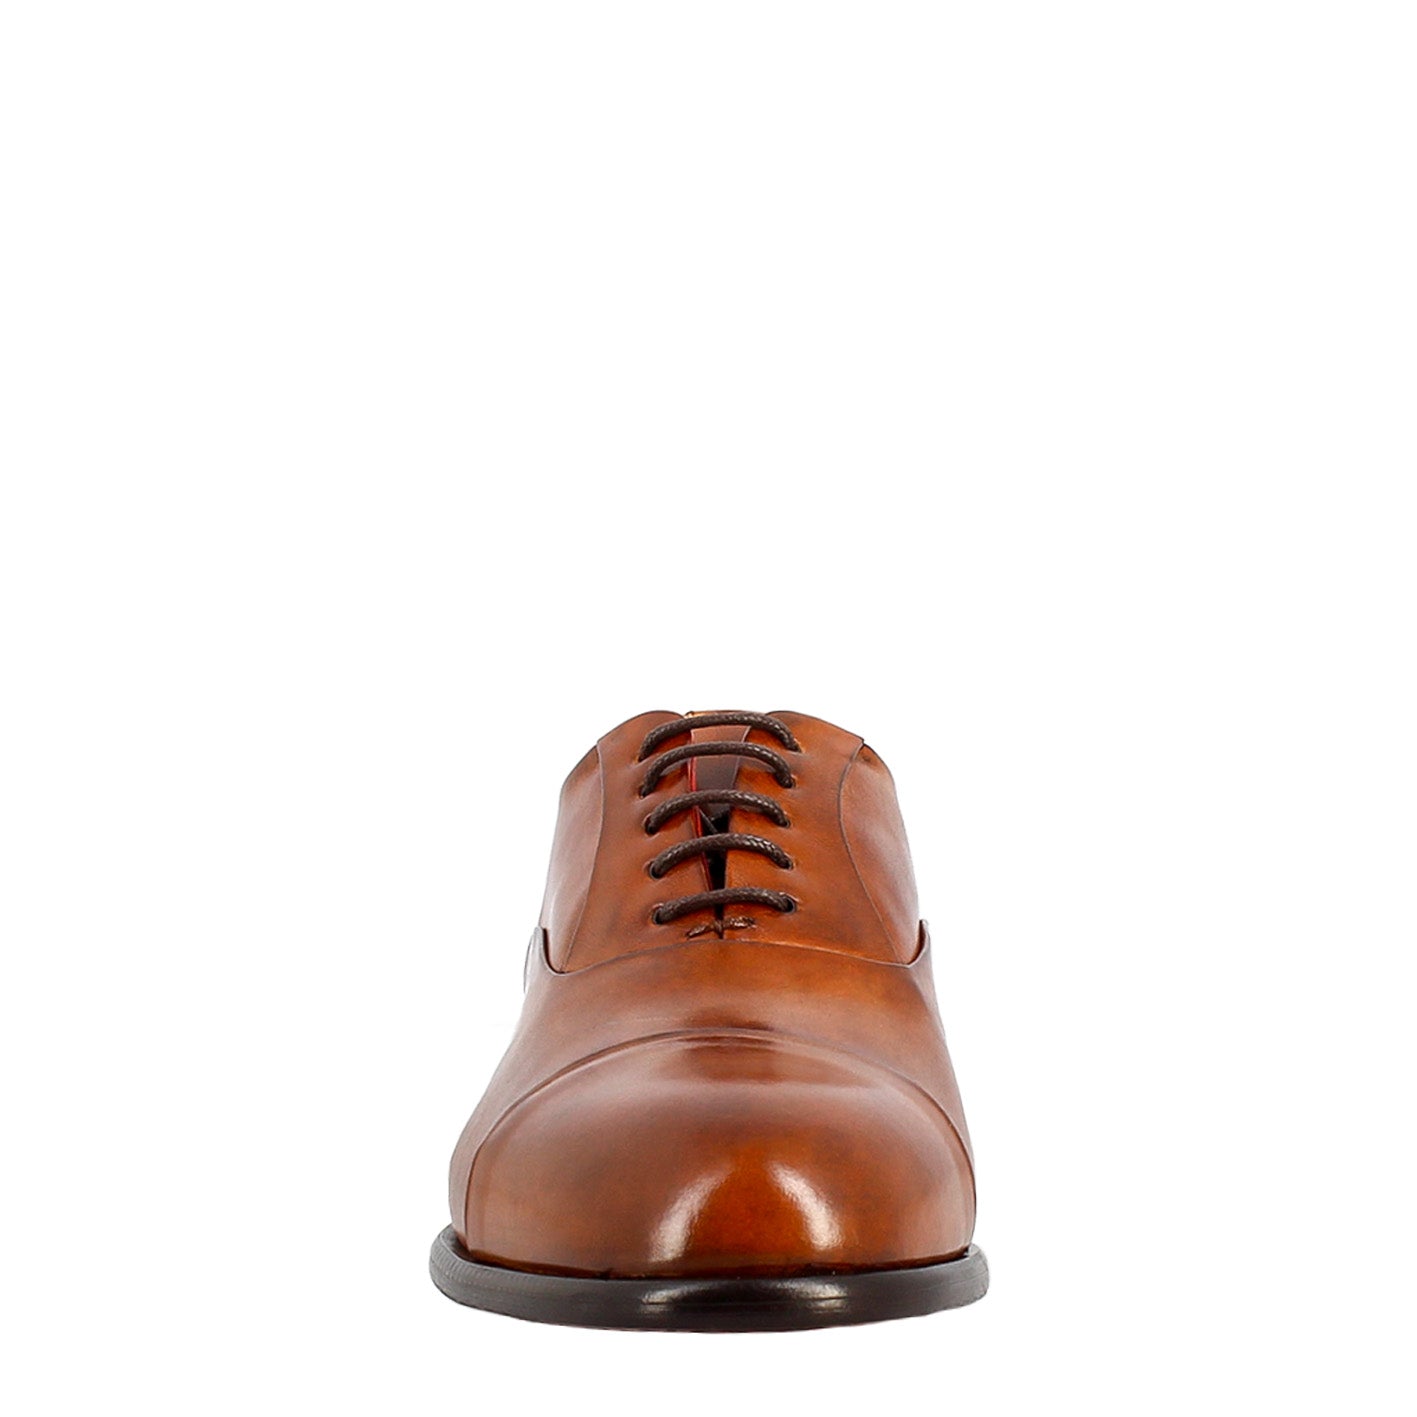 Men's elegant brown oxford in leather and red lining